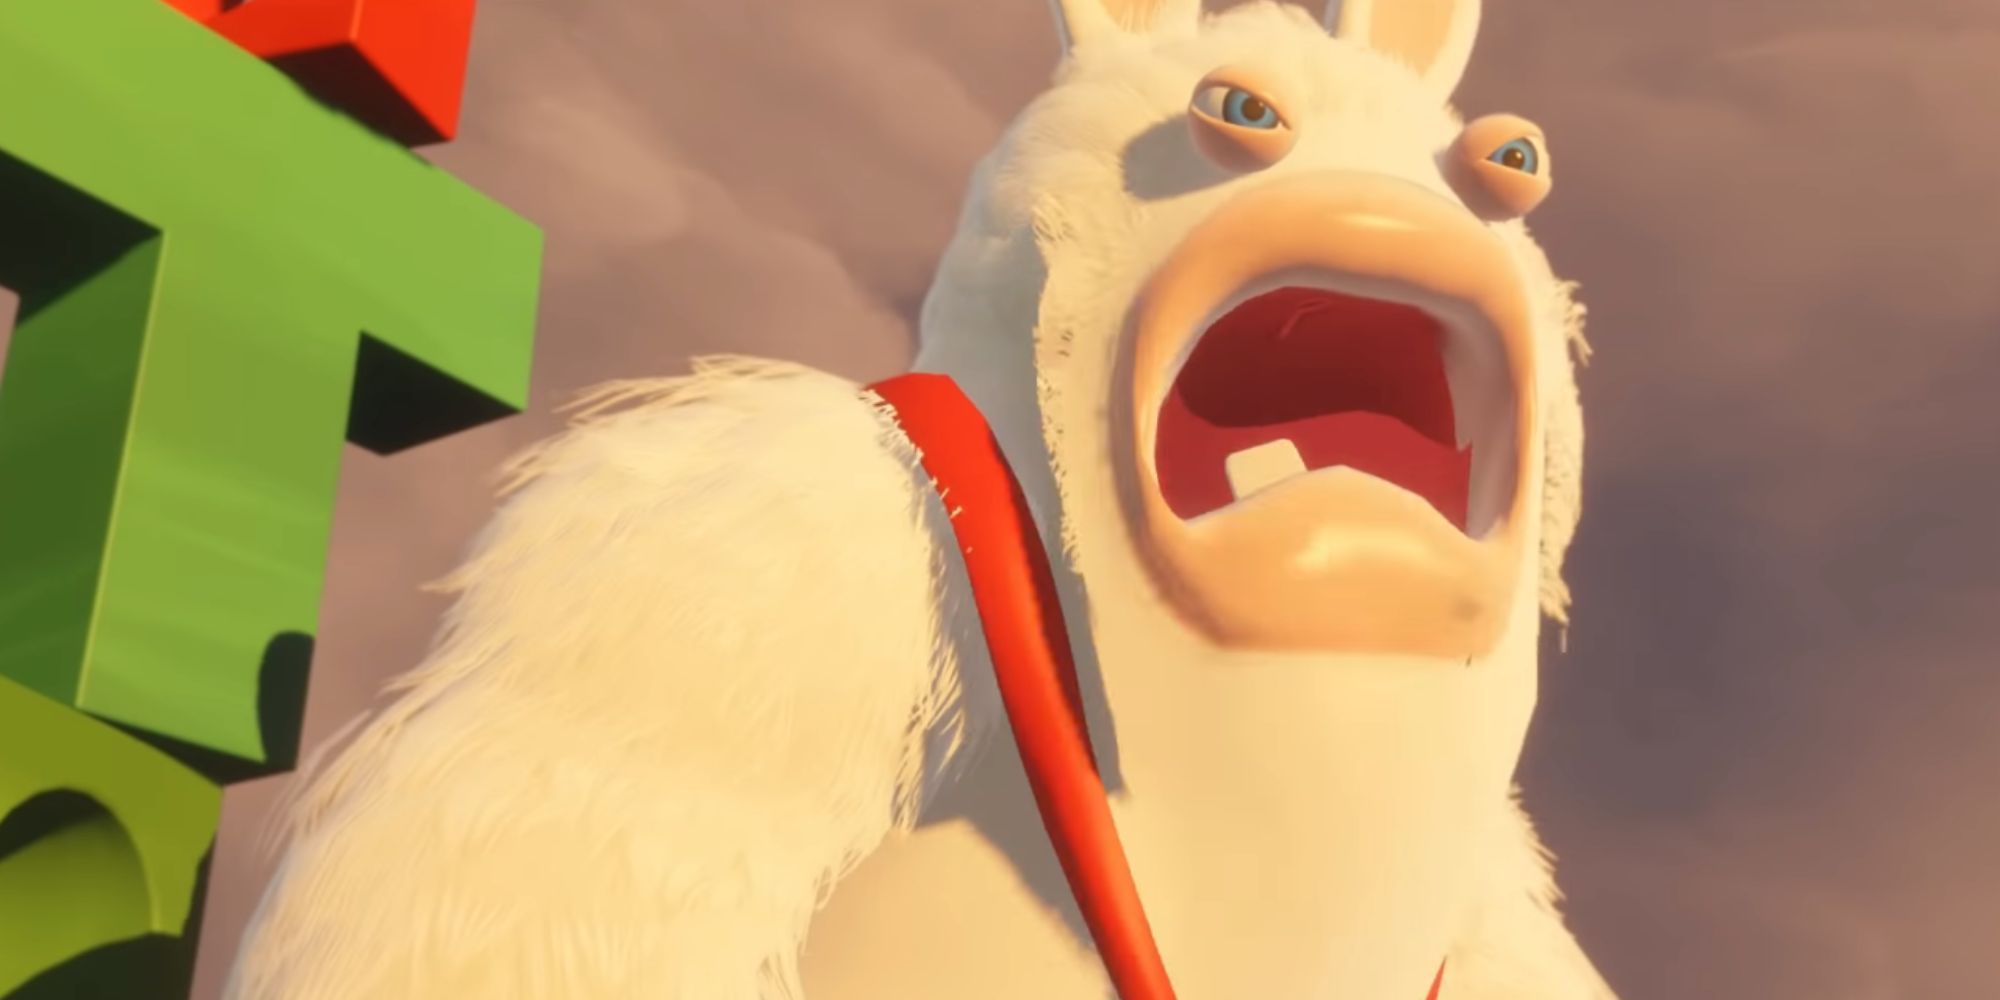 Rabbid Kong roars into the sky by some stacked letters